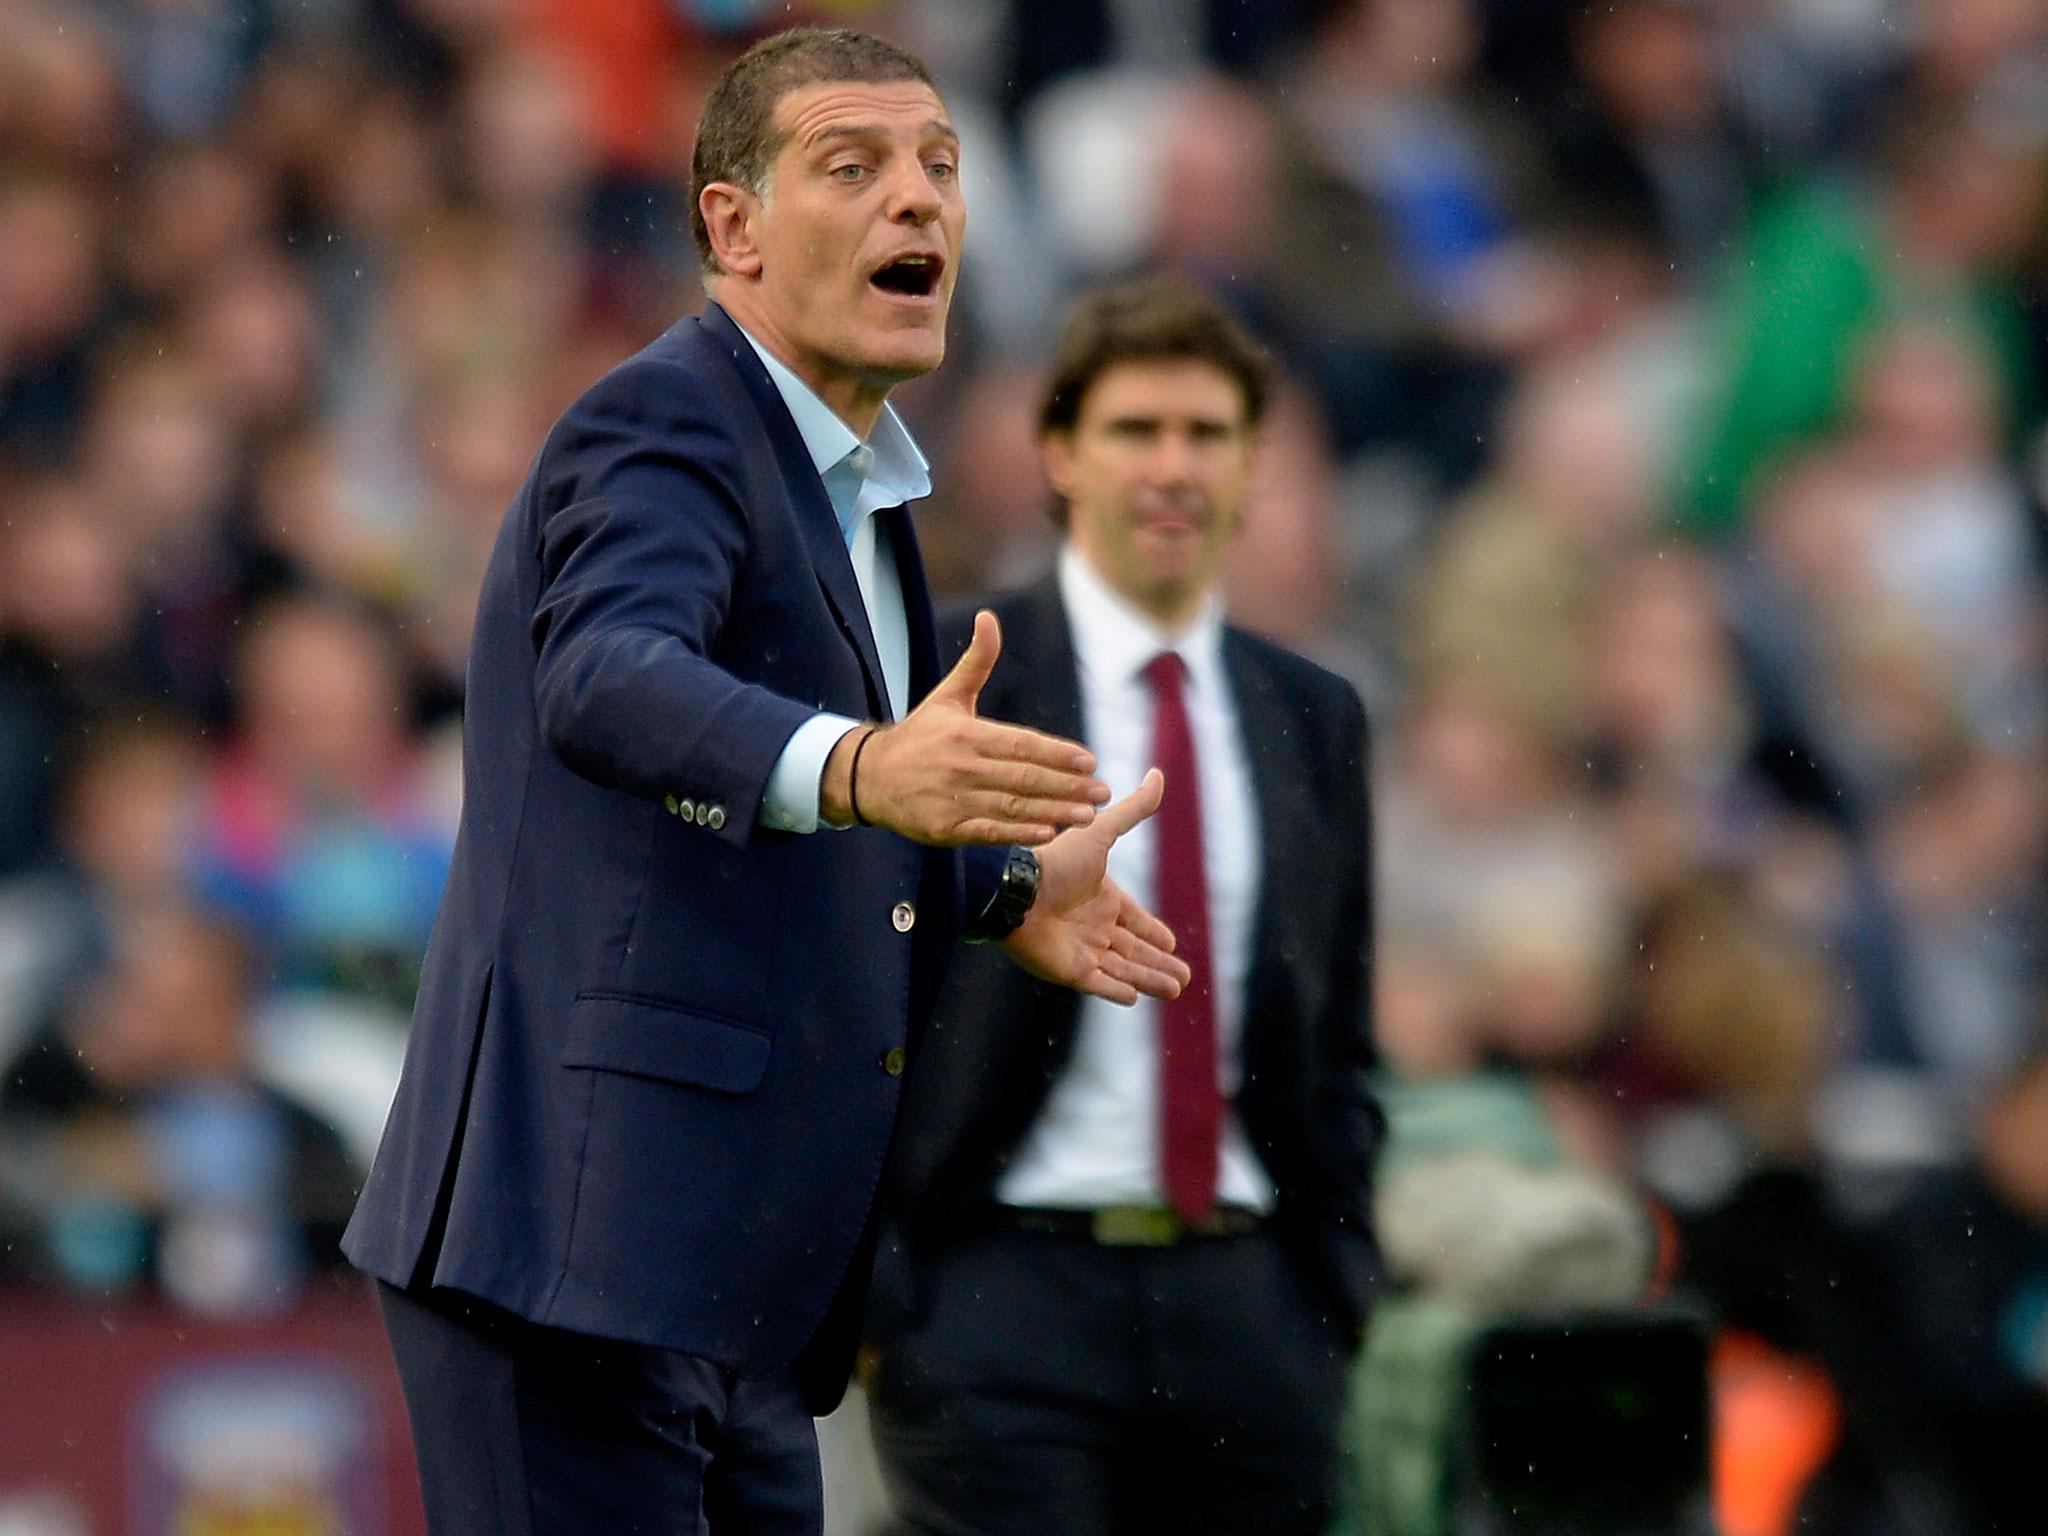 Bilic will be hoping his side can build on their 3-0 win over Crystal Palace